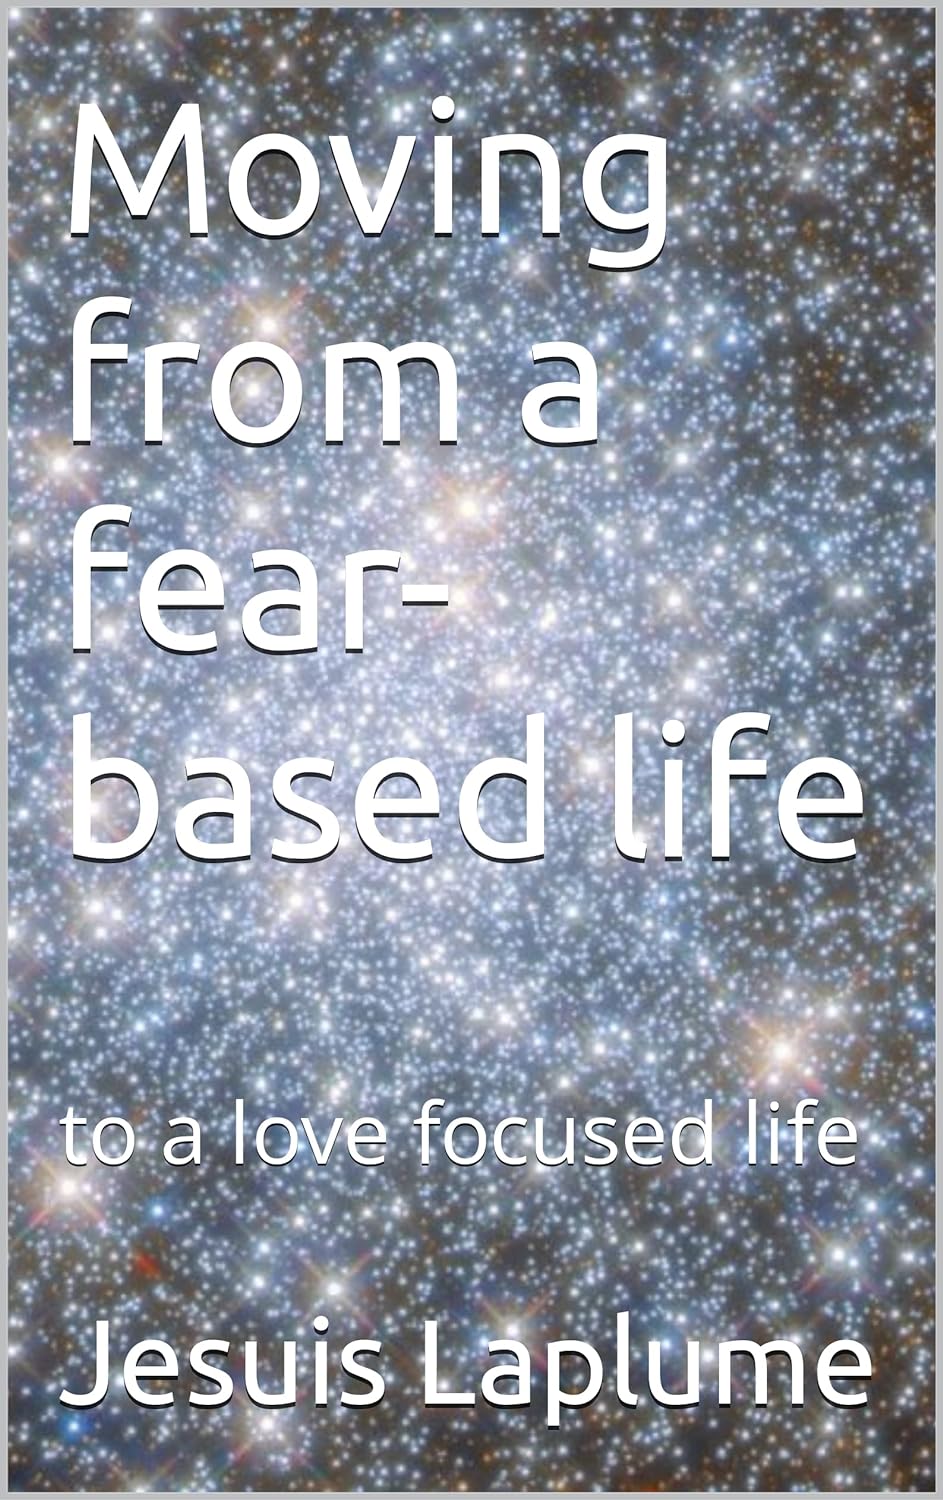 Renowned Author Jim as Jesuis Laplume Inspires Readers to Embrace Love in This Selected Book, "Moving from a Fear-Based Life: to a Love-Focused Life"